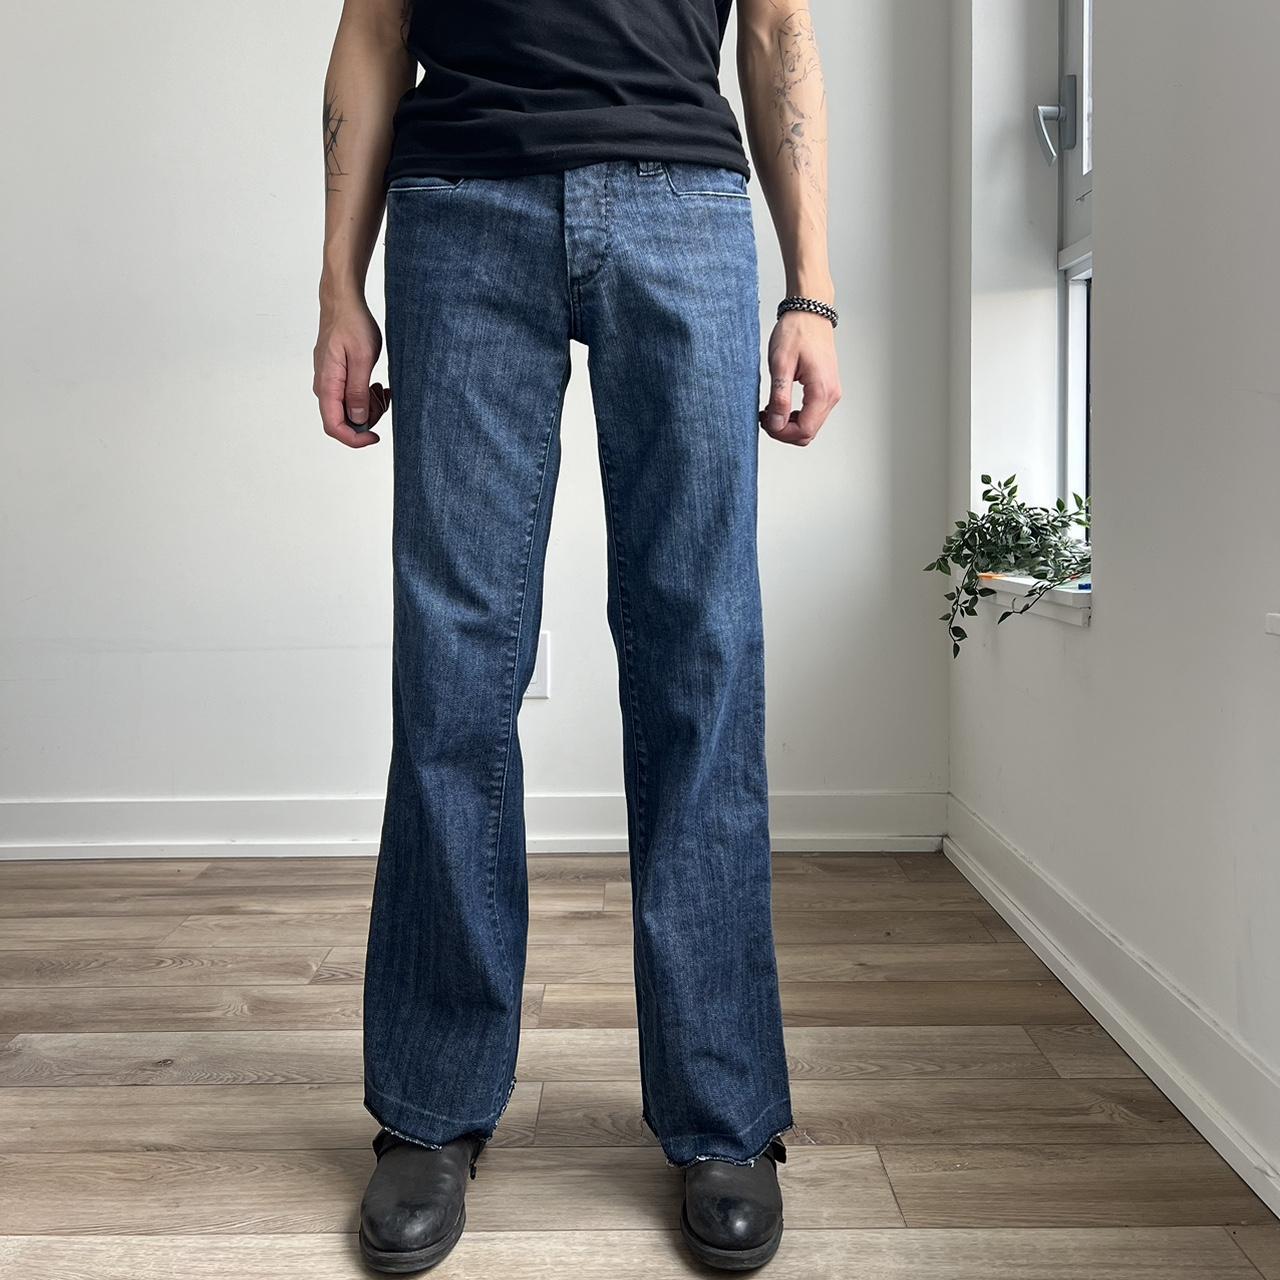 CYBER Y2K PARASUCO BOOT CUT JEANS ( See images to... - Depop